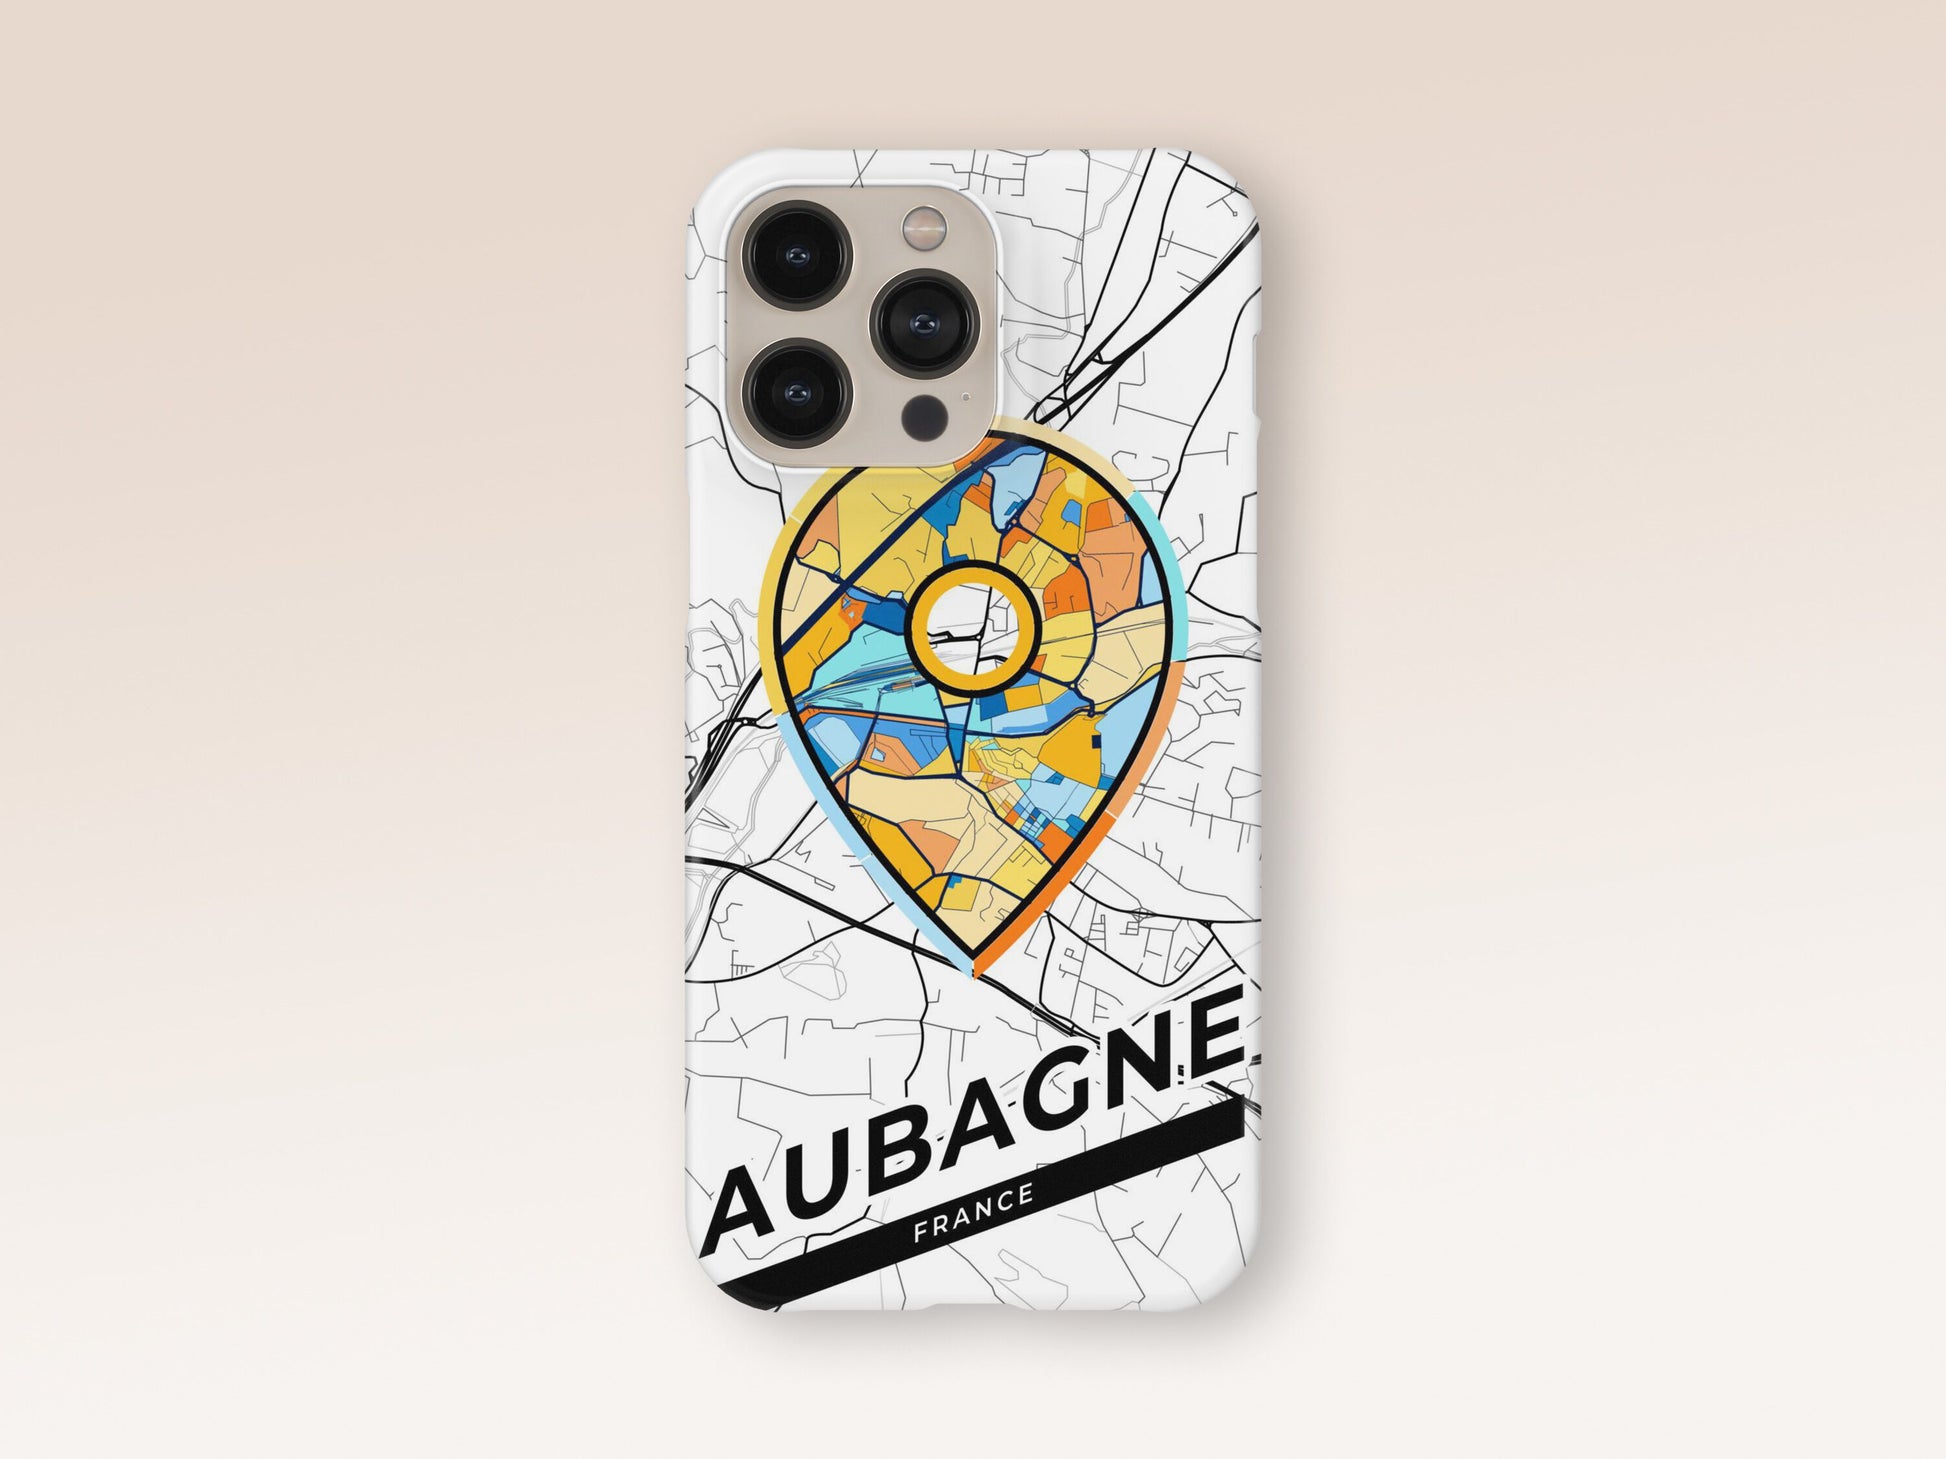 Aubagne France slim phone case with colorful icon. Birthday, wedding or housewarming gift. Couple match cases. 1